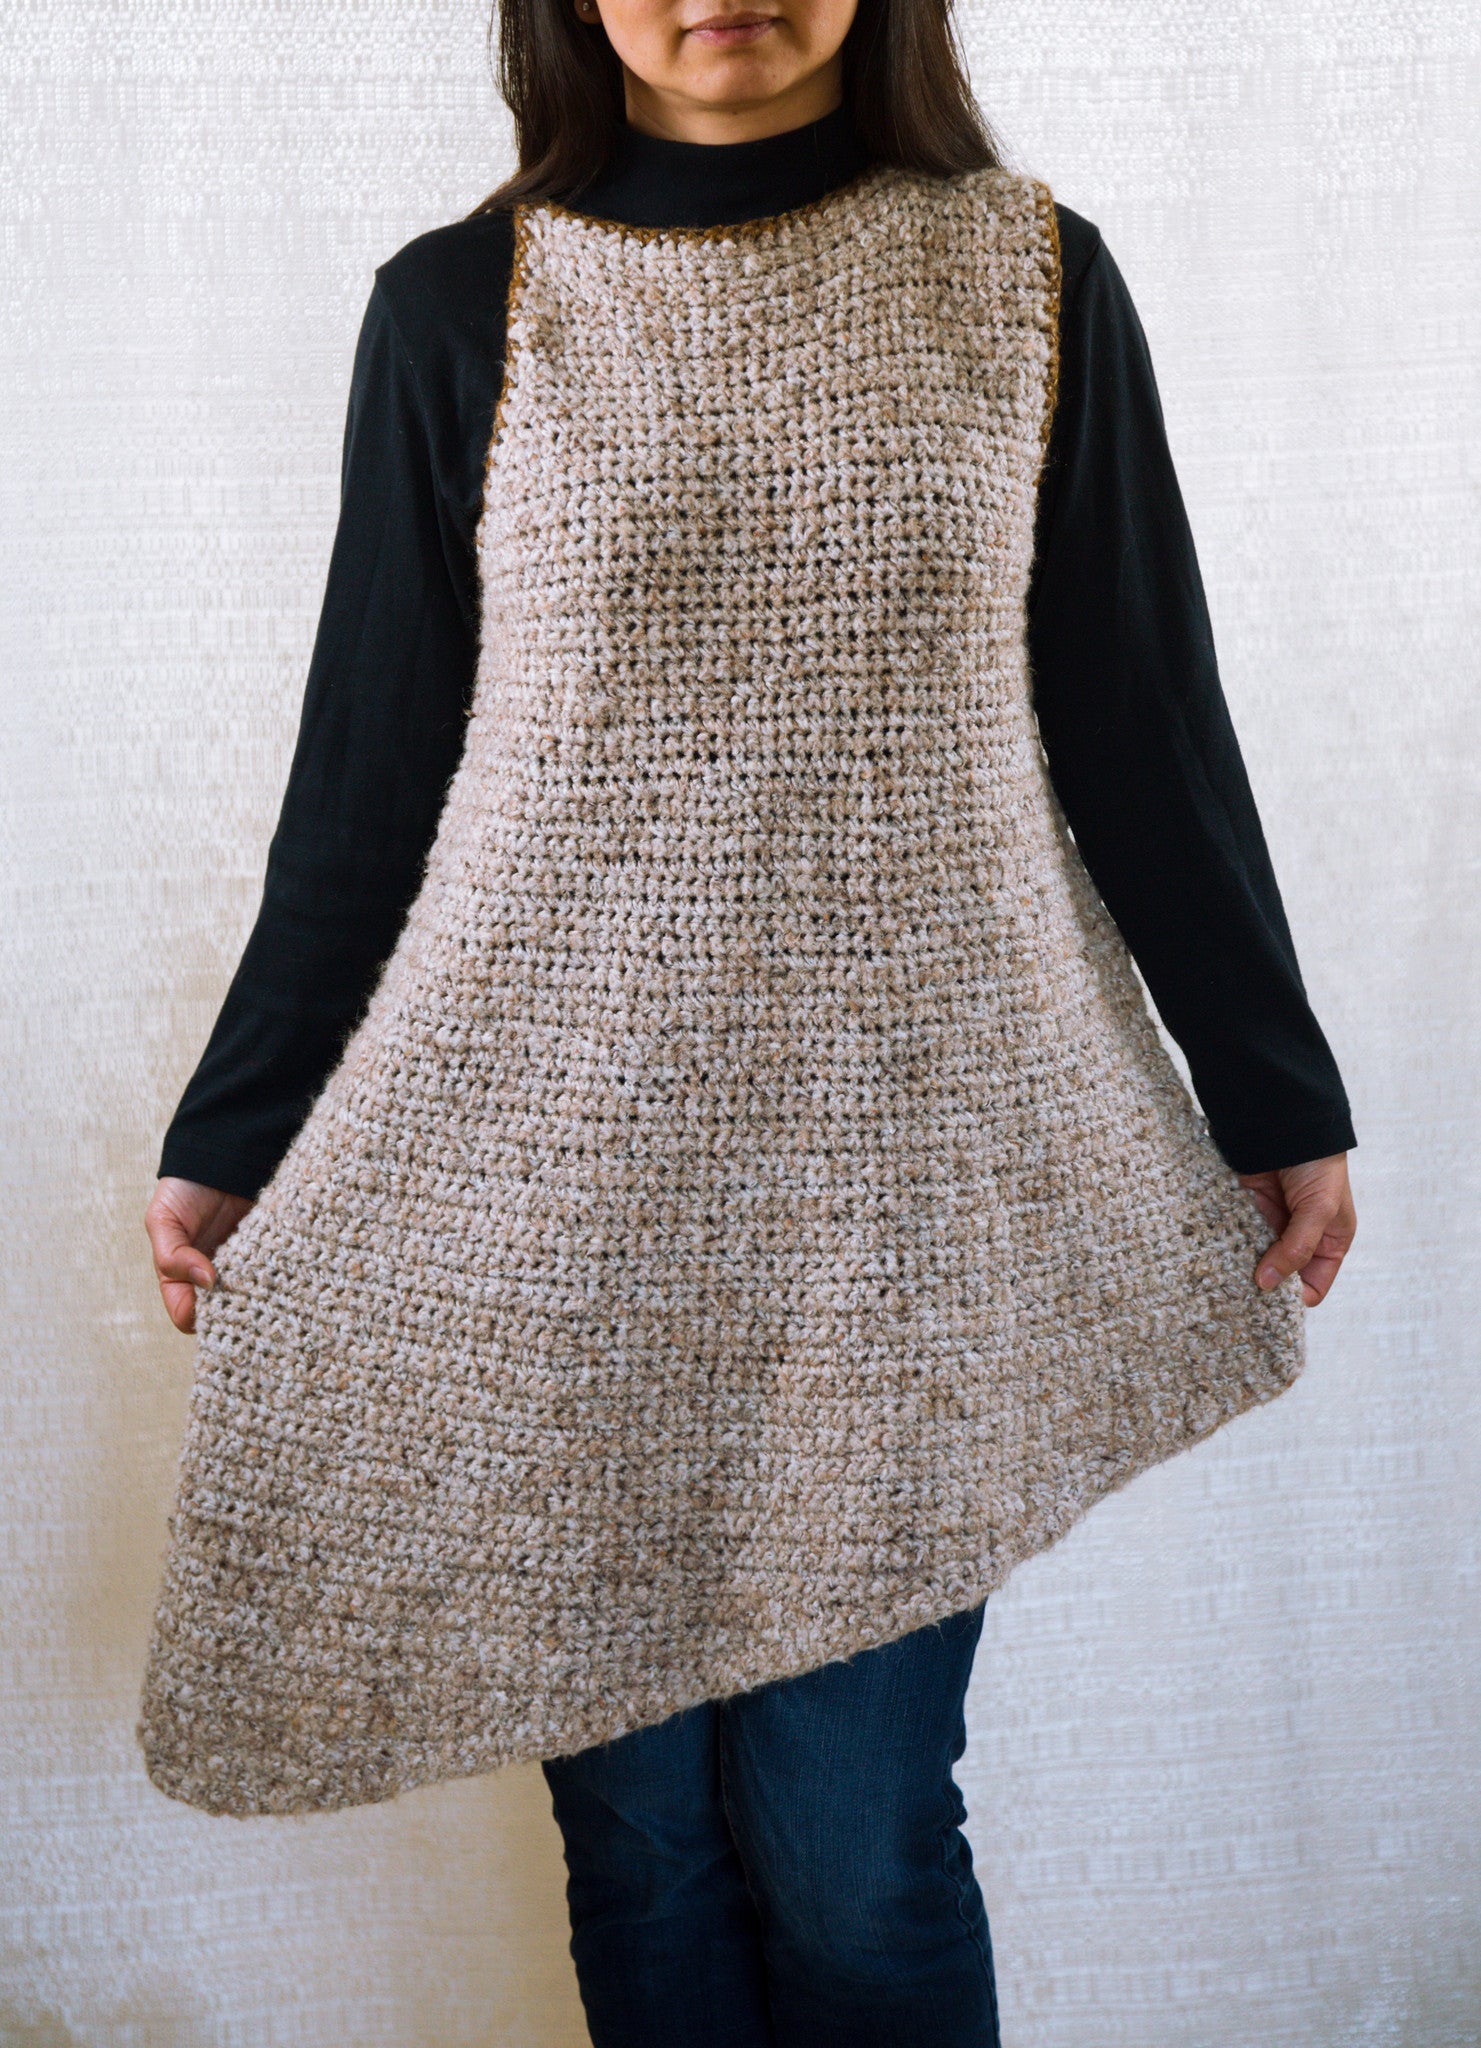 LVO-117 Asymmetrical, Reversible Pull Over Dress-Hand Crochet-Ready to Ship